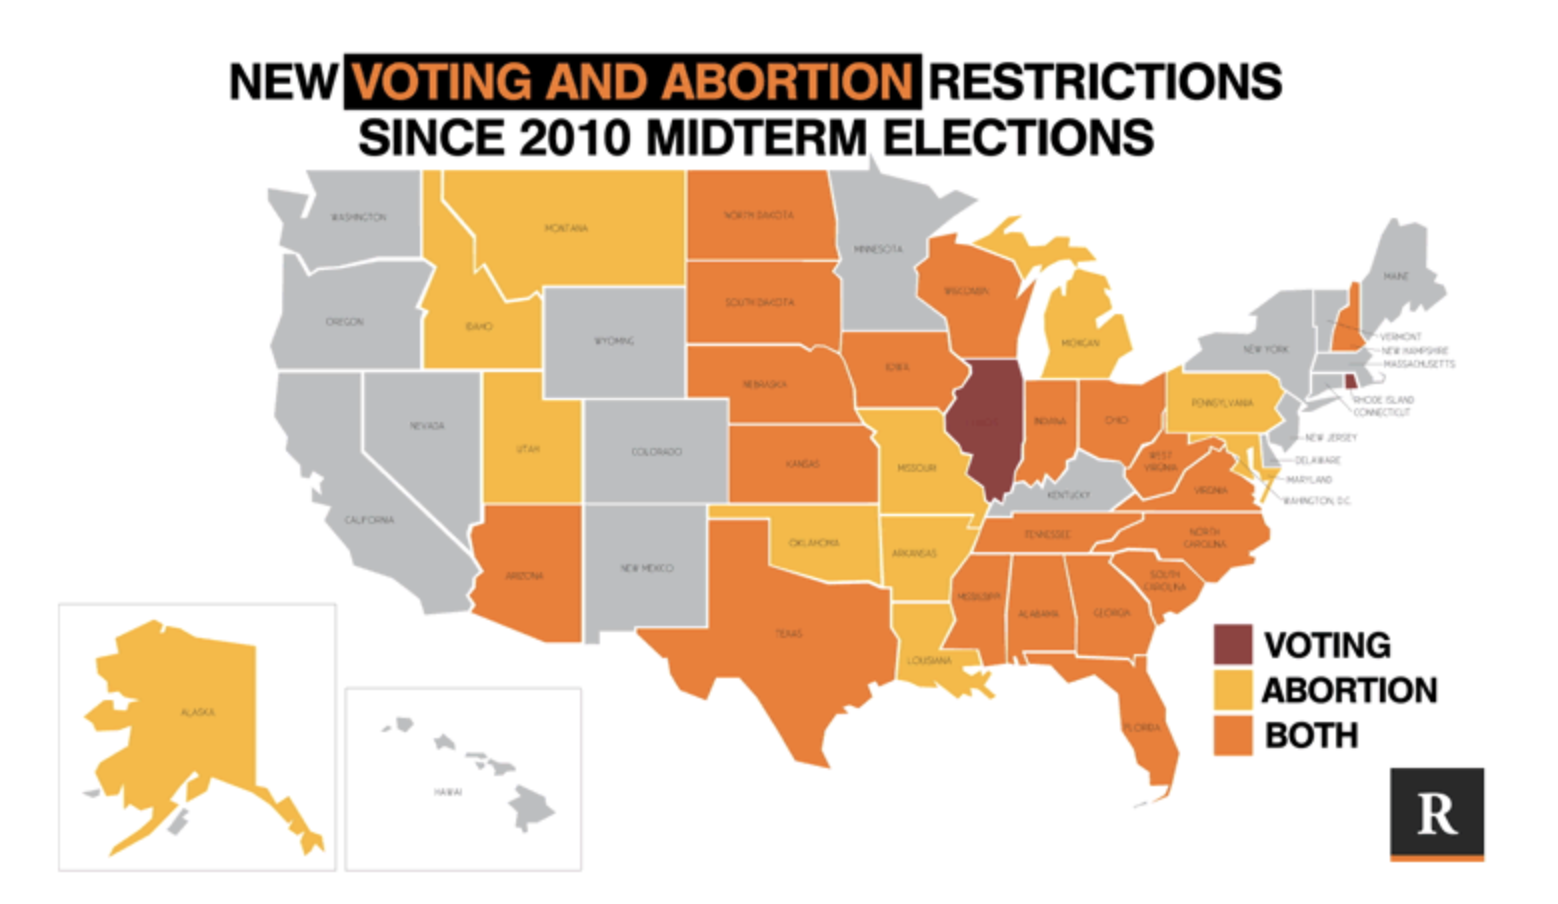 Abortion and voting restrictions